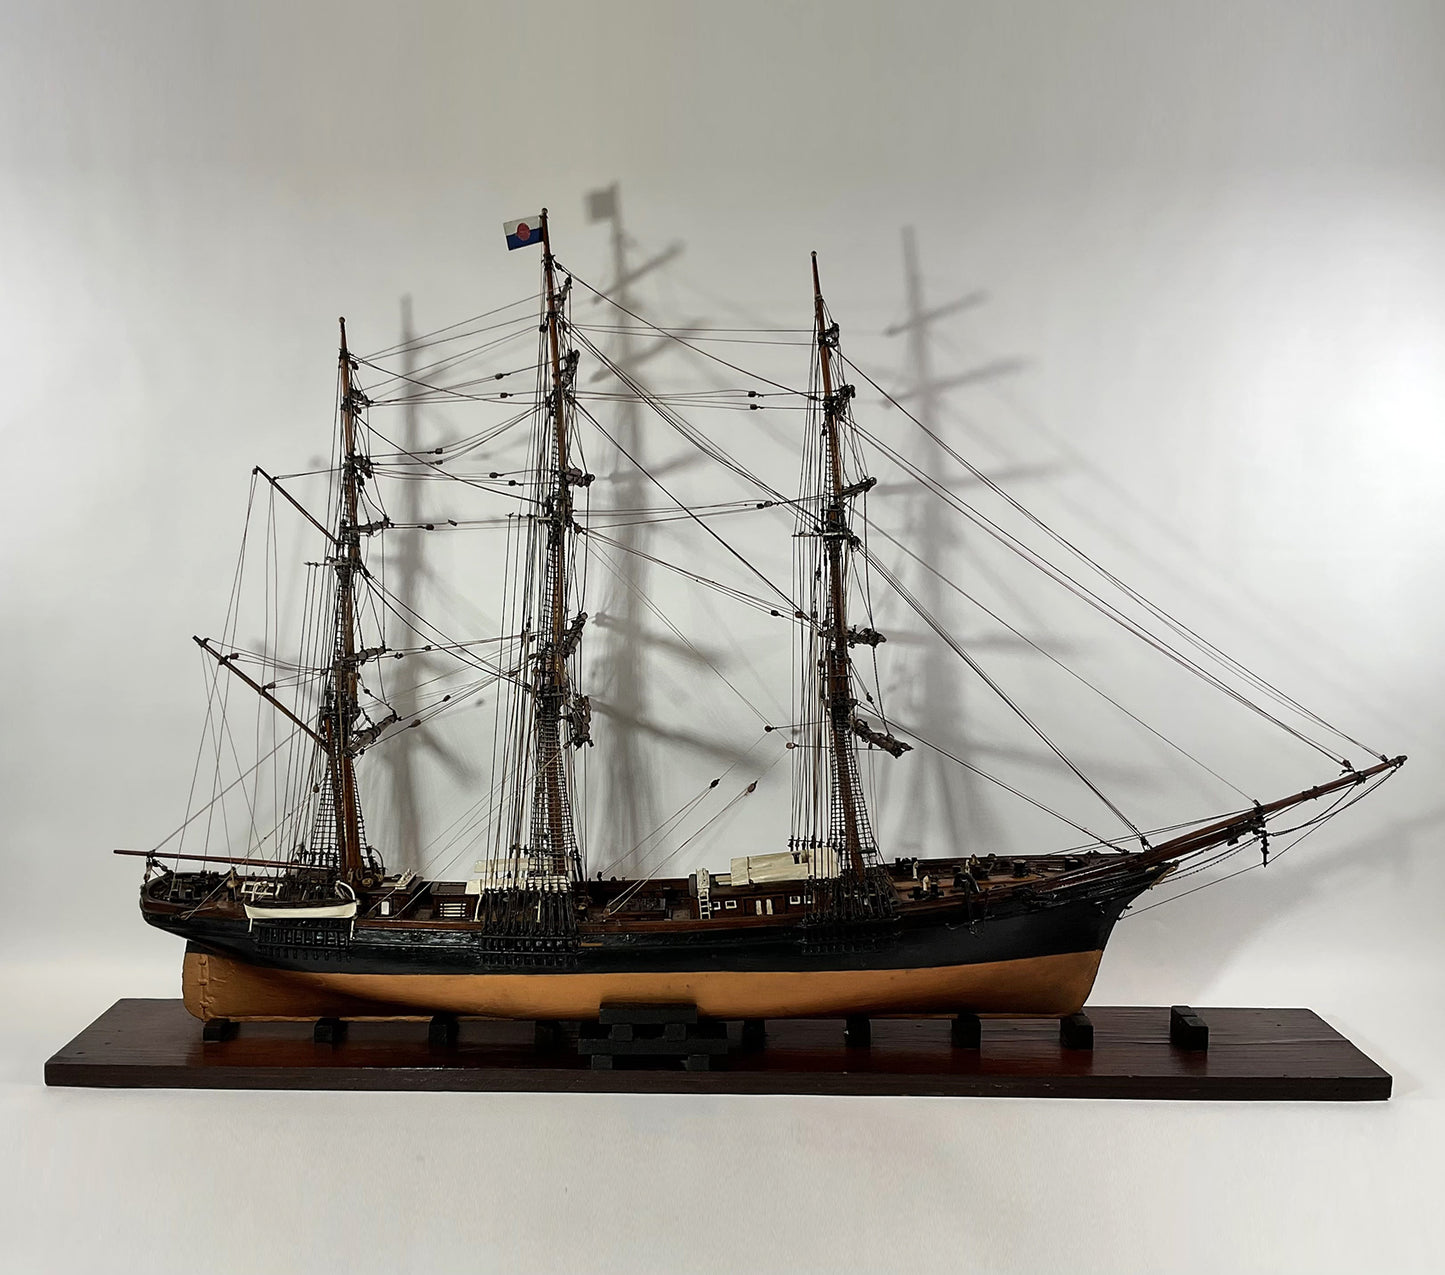 Antique Model Of Clipper Ship Nightingale - Lannan Gallery